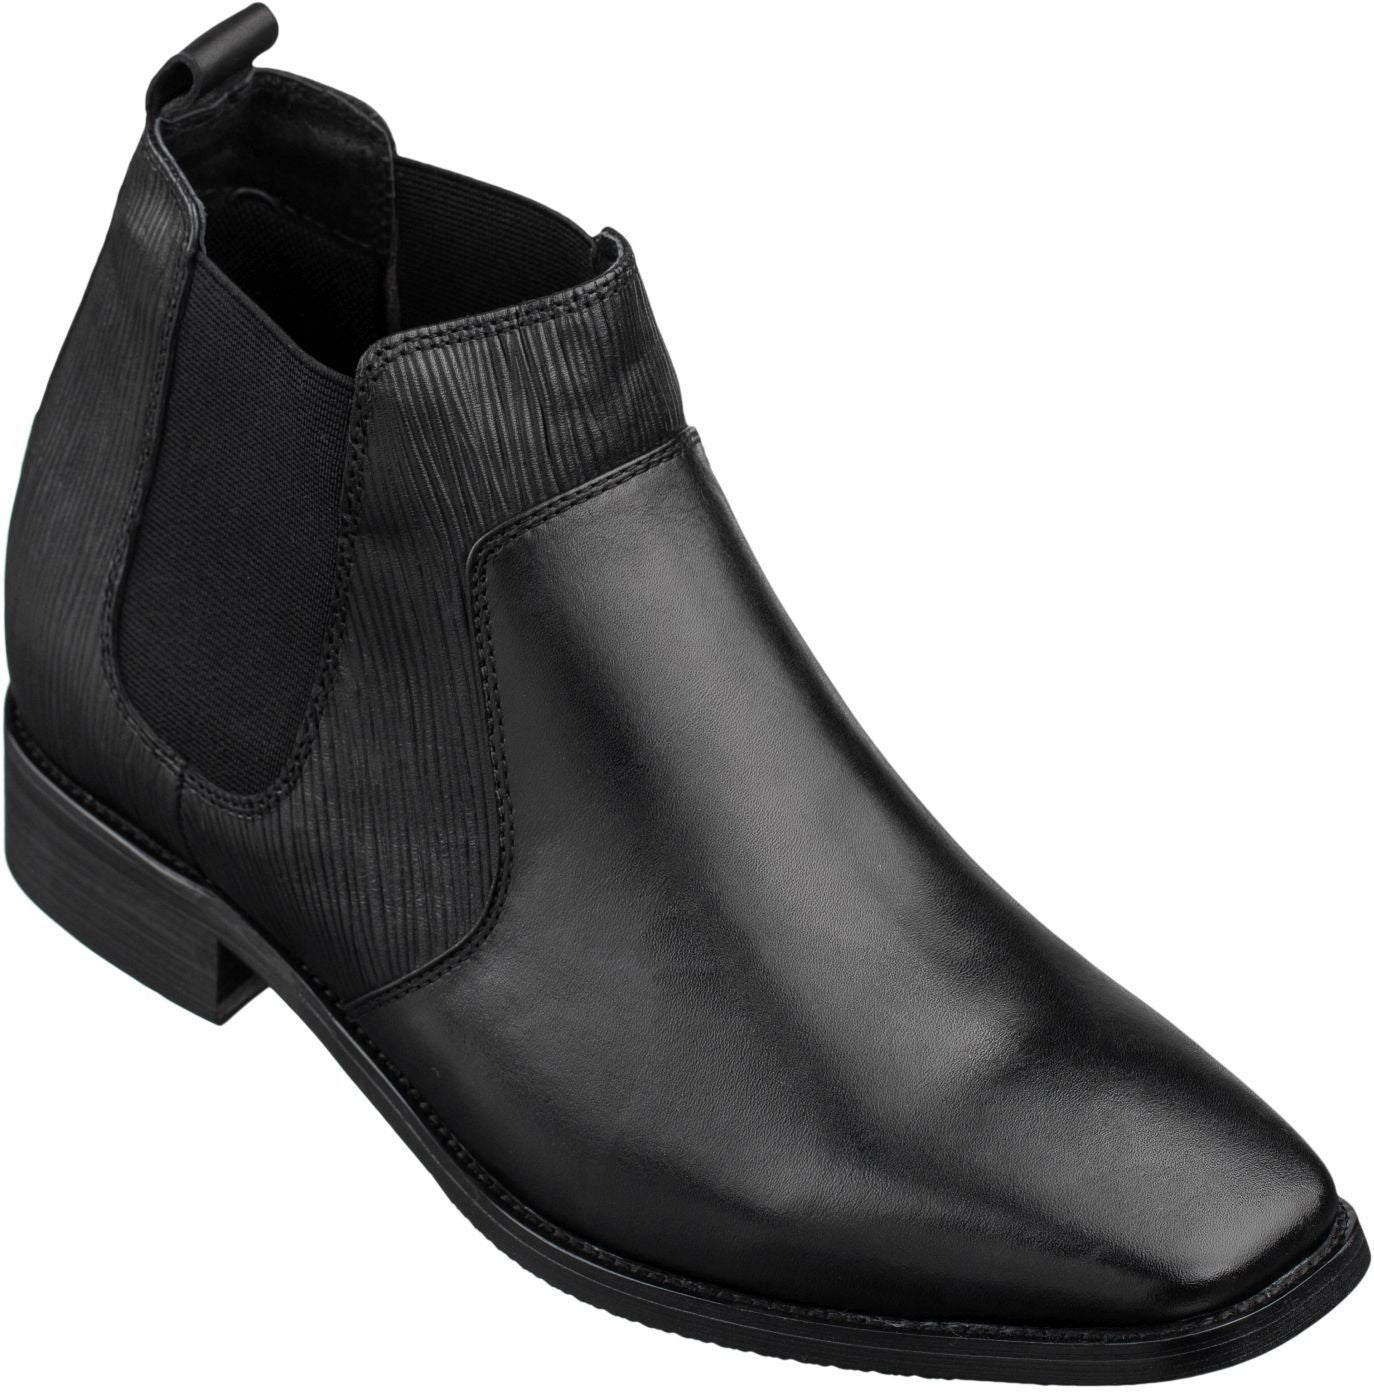 Elevator shoes height increase CALTO Black Leather Chelsea Boots - 3 Inches - T54021